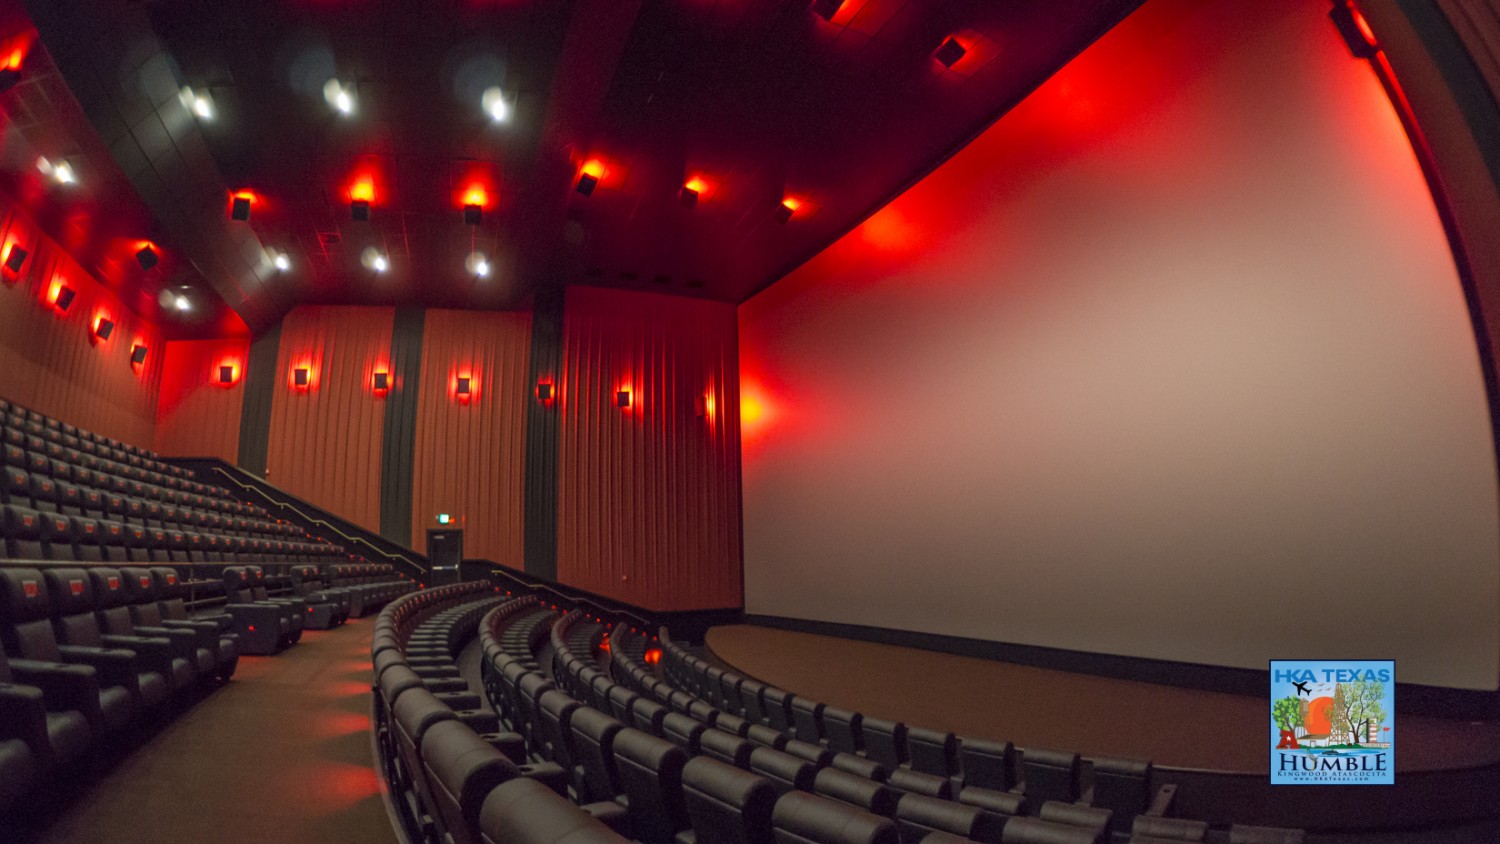 Photos & Video of the new SDX theater in Kingwood